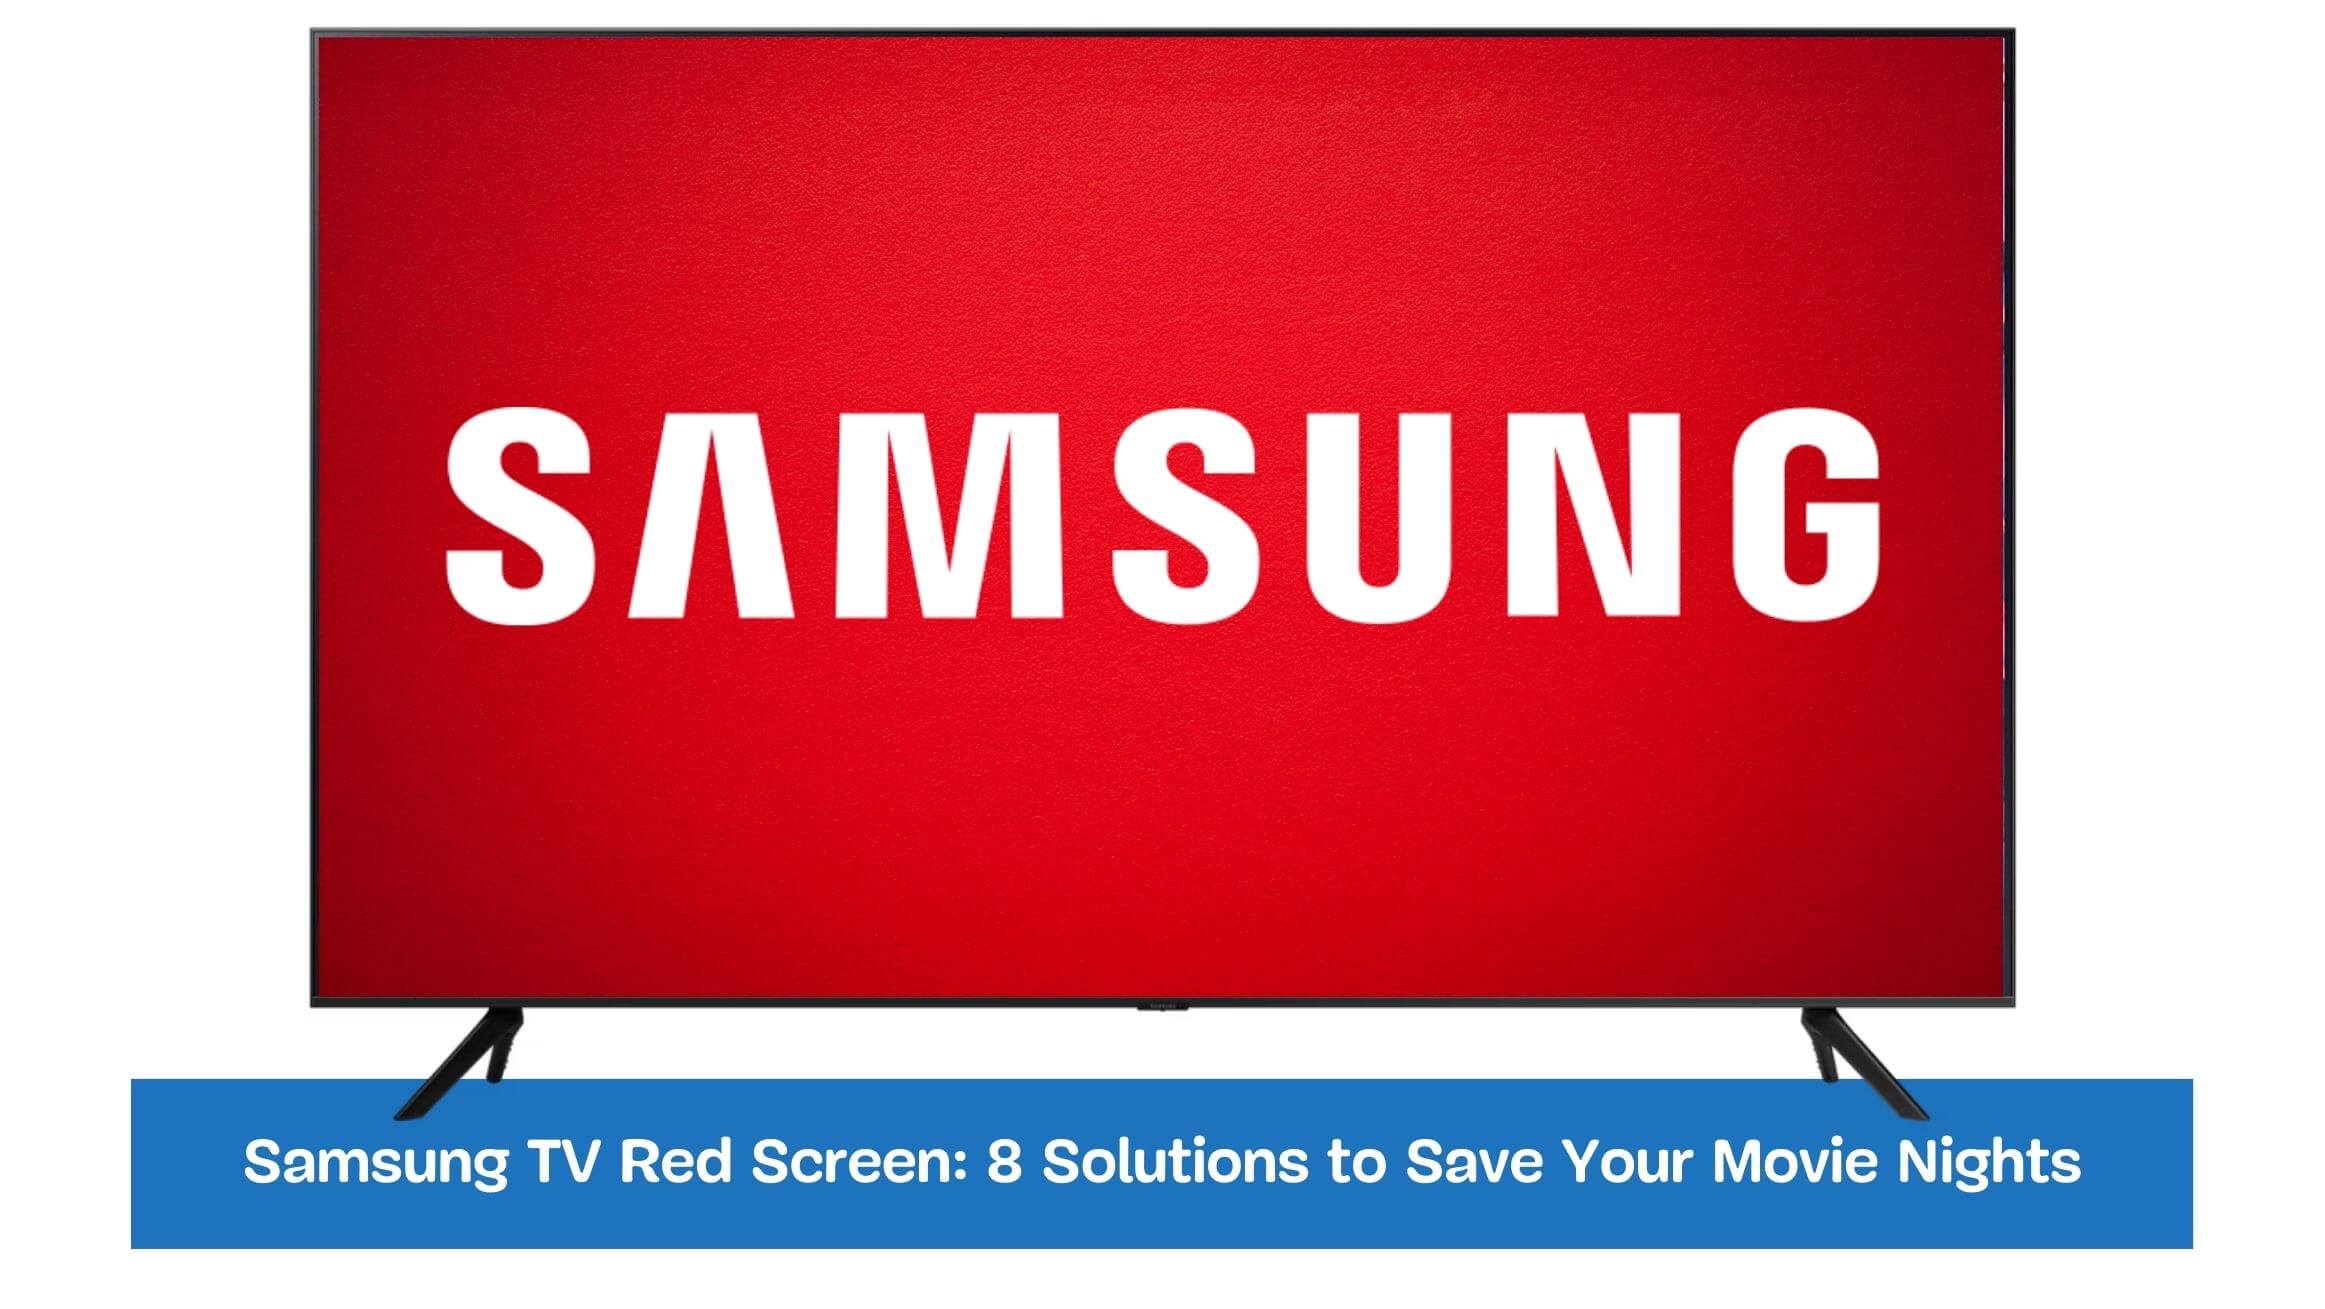 Samsung TV Red Screen: 8 Solutions to Save Your Movie Nights